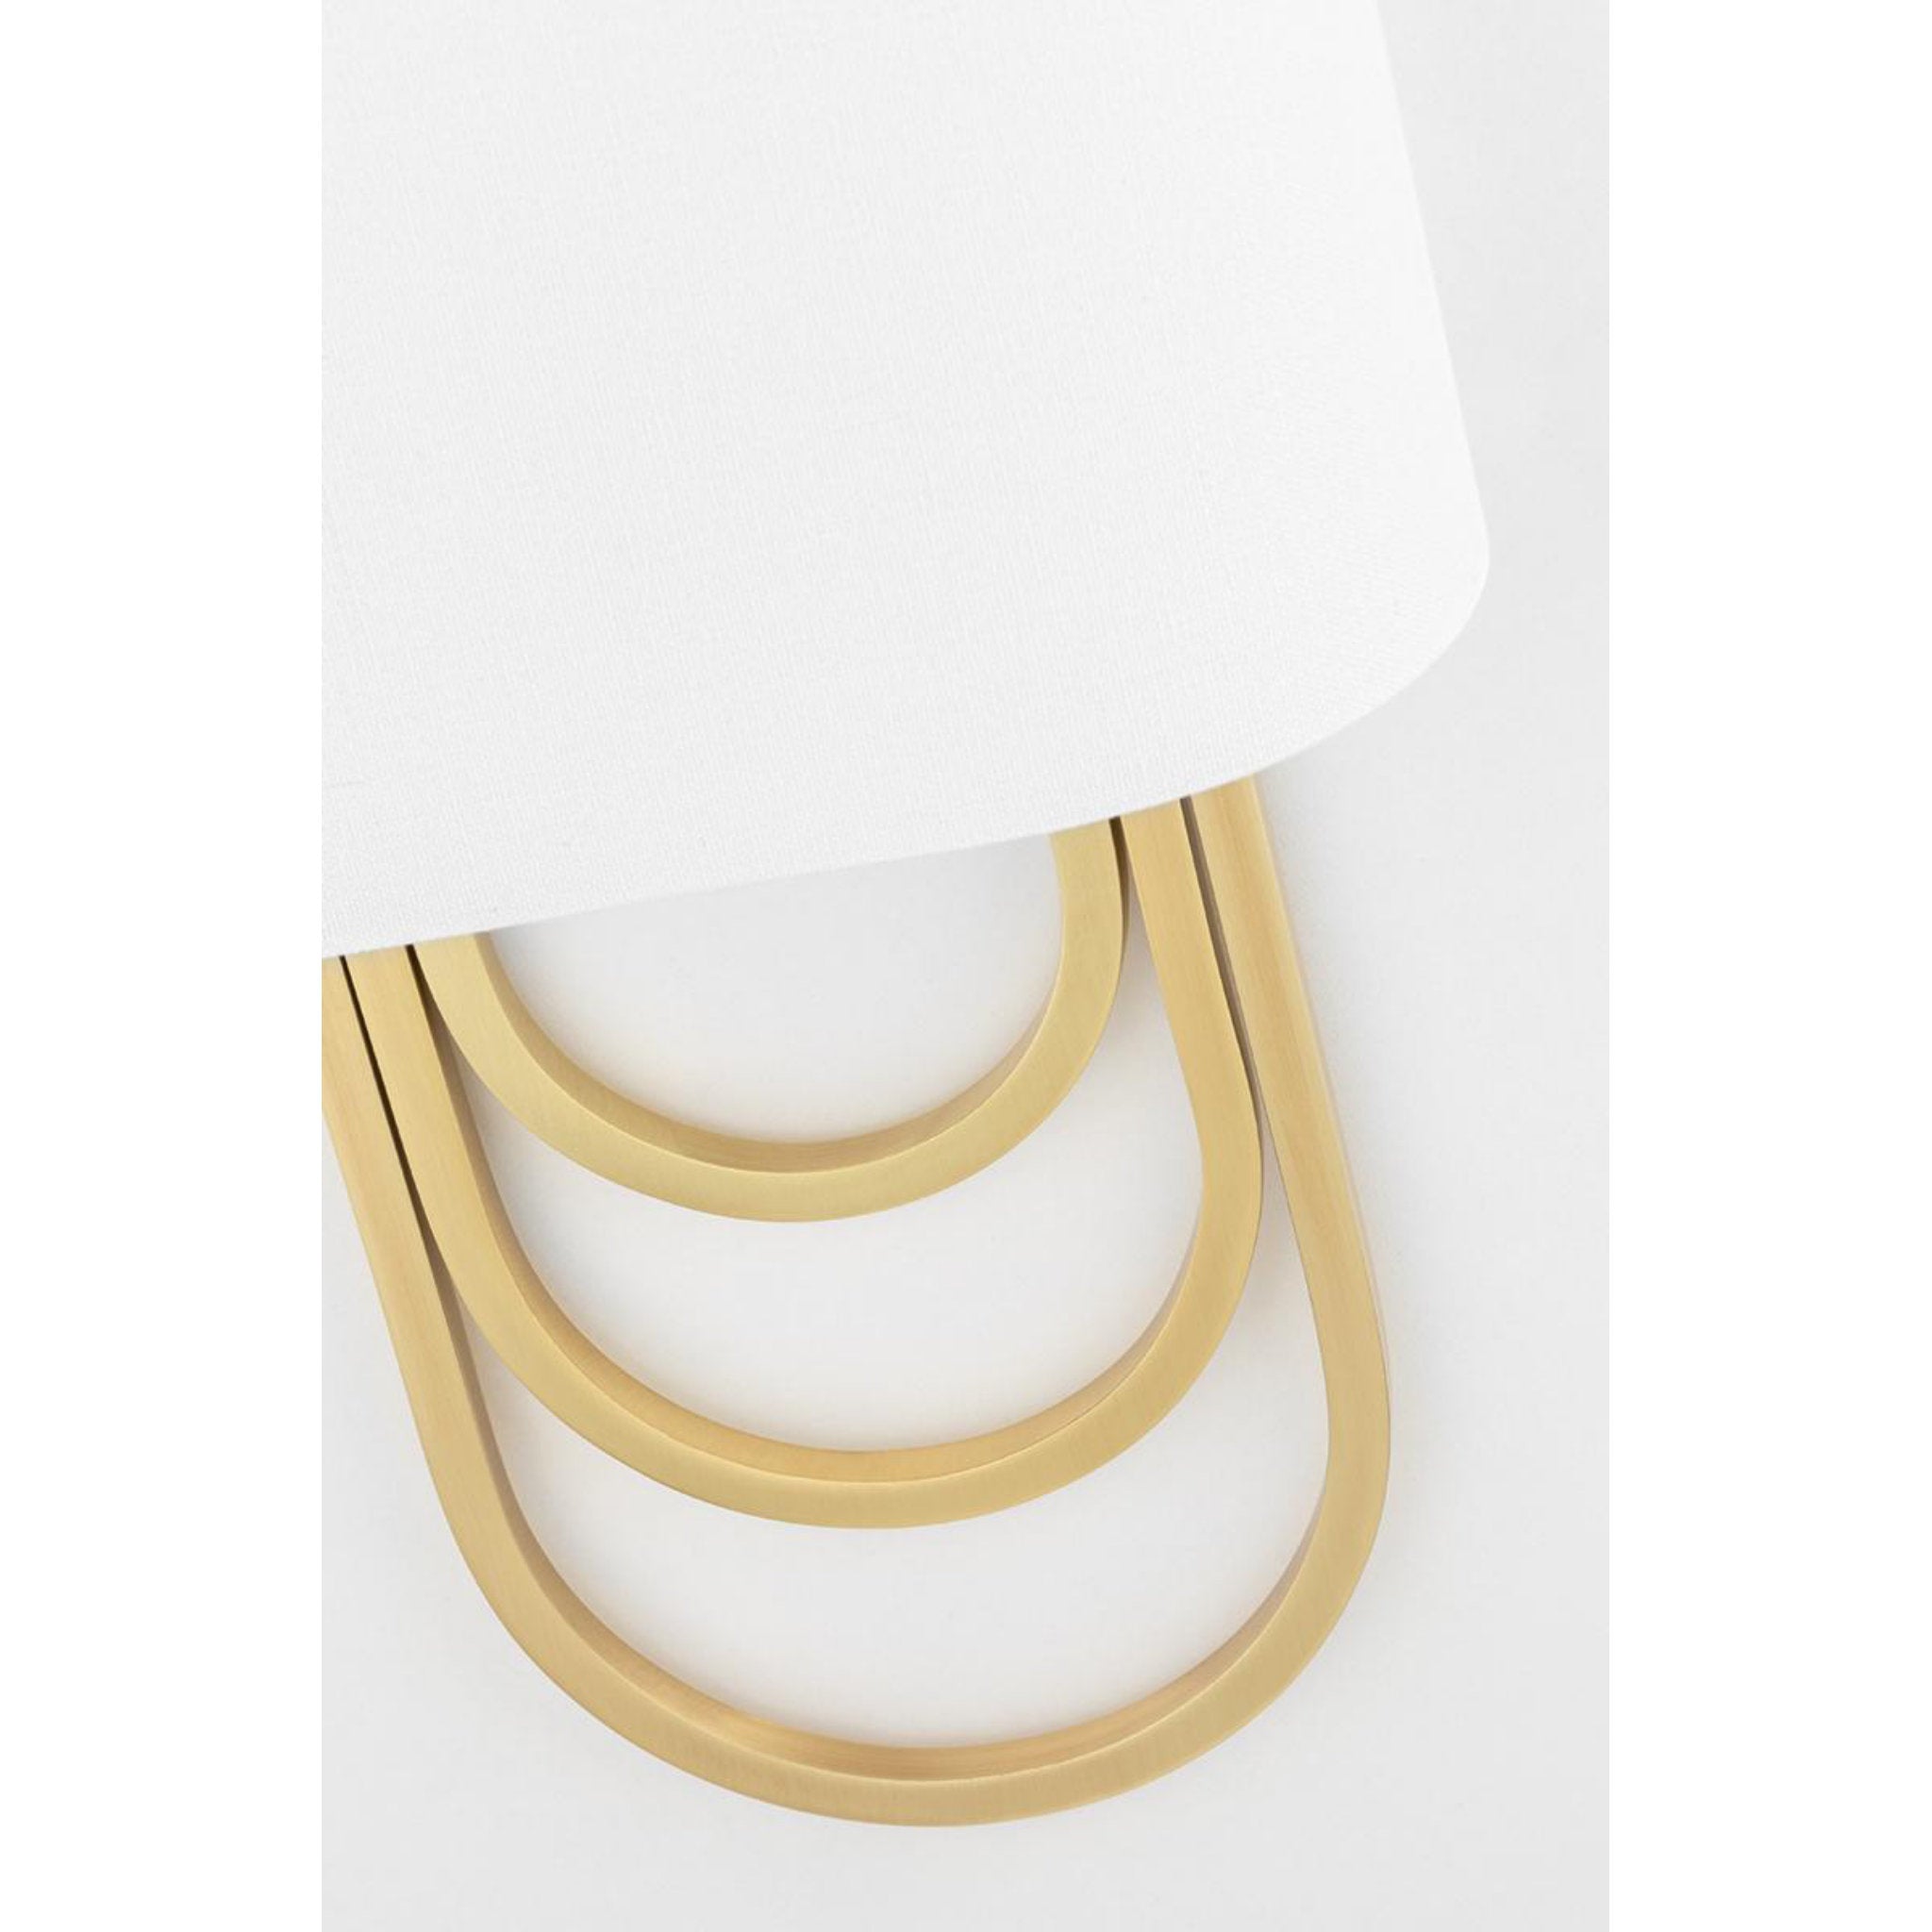 Farah 2-Light Wall Sconce in Polished Nickel